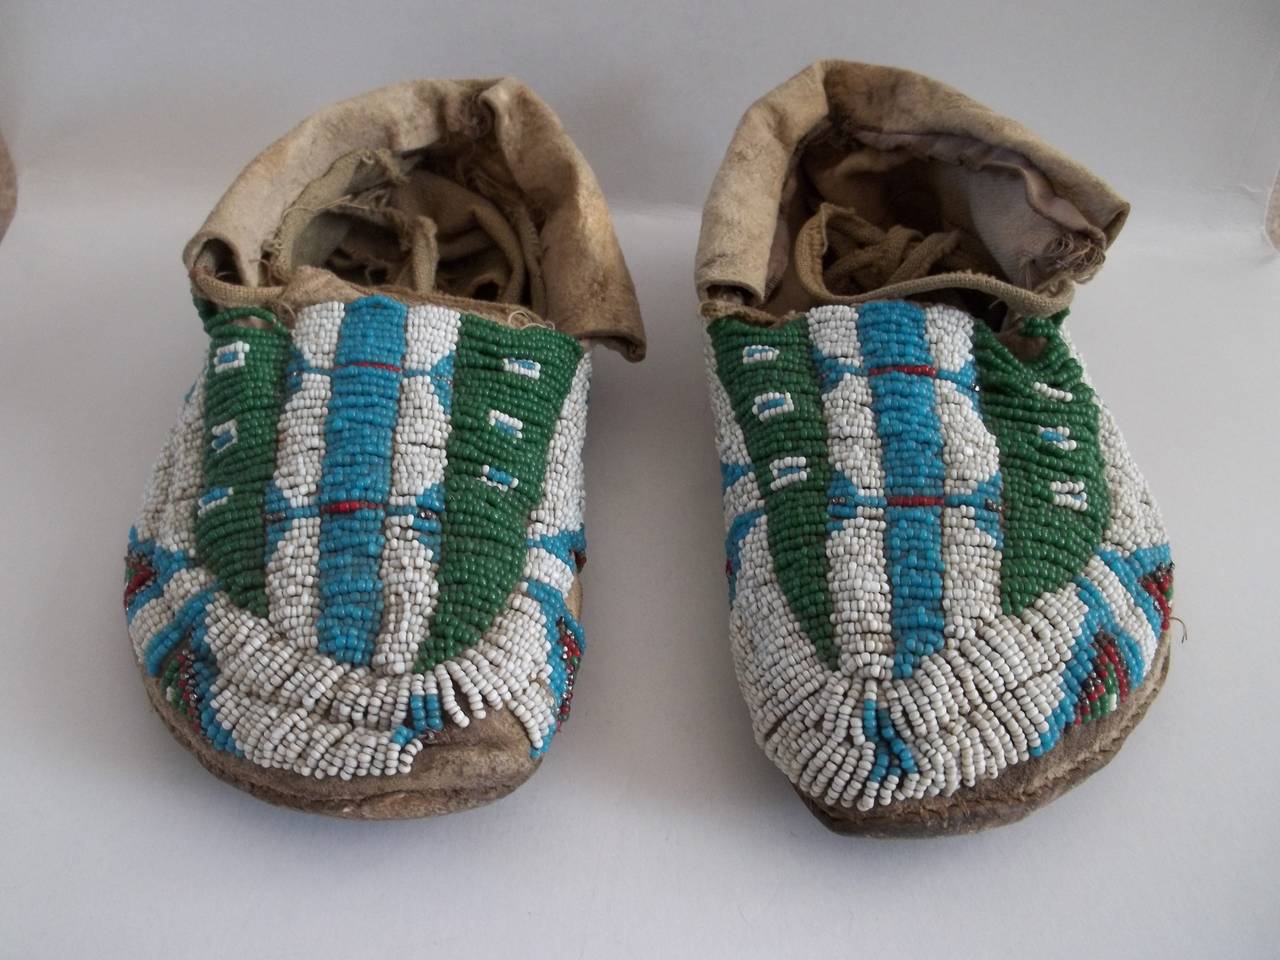 This is a rare pair of North American Central Plains beaded hide moccasins.

The uppers are fully beaded in a geometric pattern, using white
red, green and blue hand stitched beads.

We date them to the mid-19th century or possibly earlier.